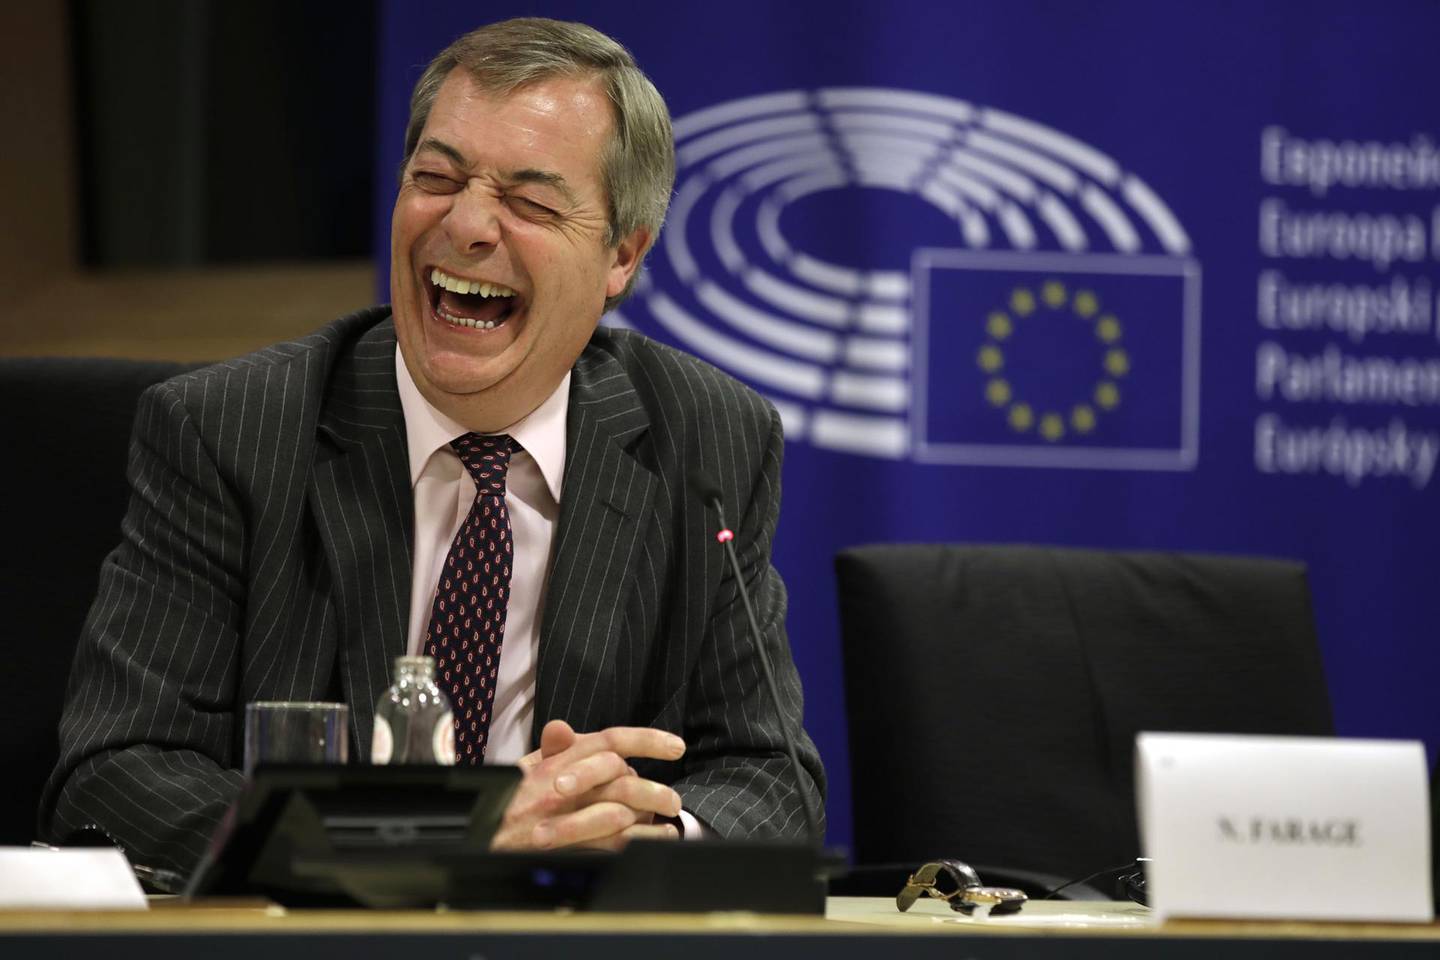 Nigel Farage, Member of European Parliament (MEP) and leader of the Brexit Party, reacts as he delivers his 'Brexodous' speech in the European Parliament in Brussels, Belgium, on Wednesday, Jan. 29, 2020. The U.K. will probably need significantly longer than eleven months to strike a future trade deal with the European Union, the bloc’s chief Brexit negotiator warned. Photographer: Olivier Matthys/Bloomberg